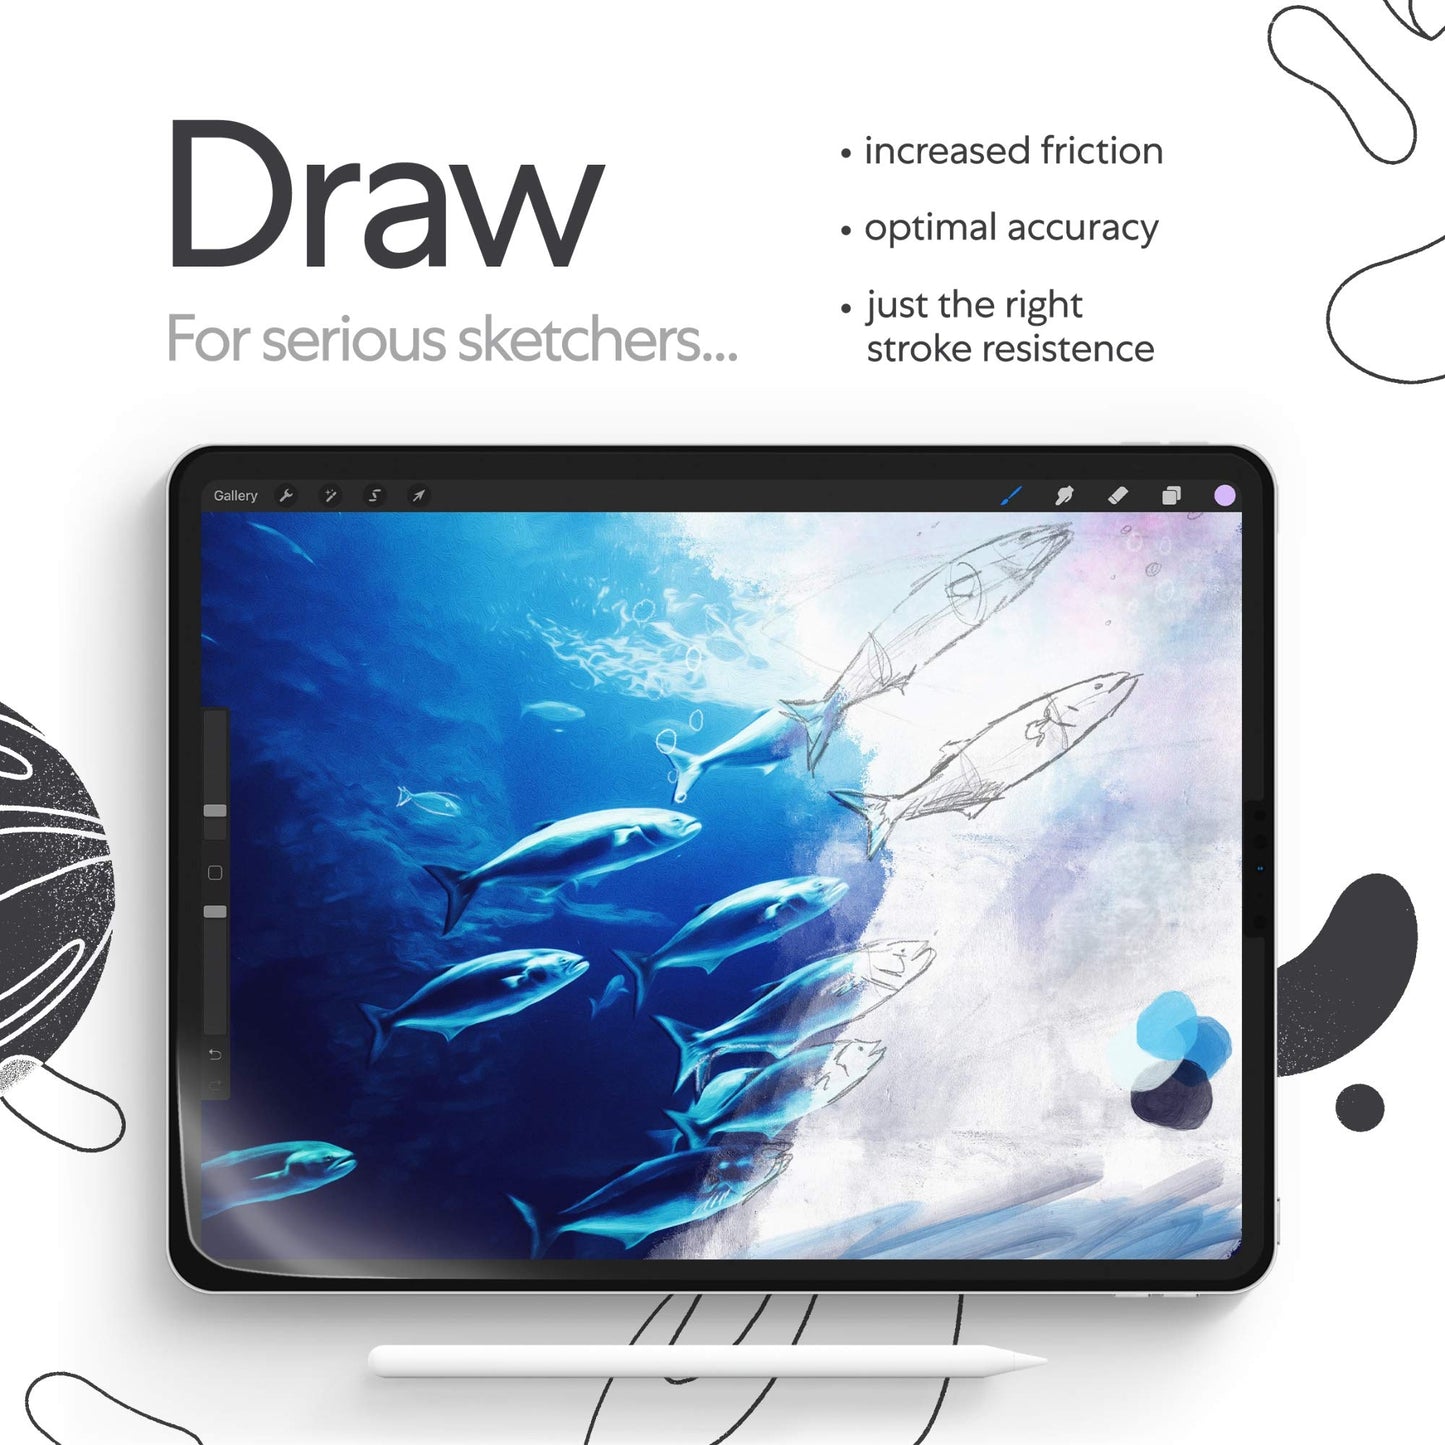 Paperlike (2 Pieces) for iPad Pro 11" (2020/21/22) & iPad Air 10.9" (2020/22) - Screen Protector for Drawing, Writing, and Note-taking like on Paper